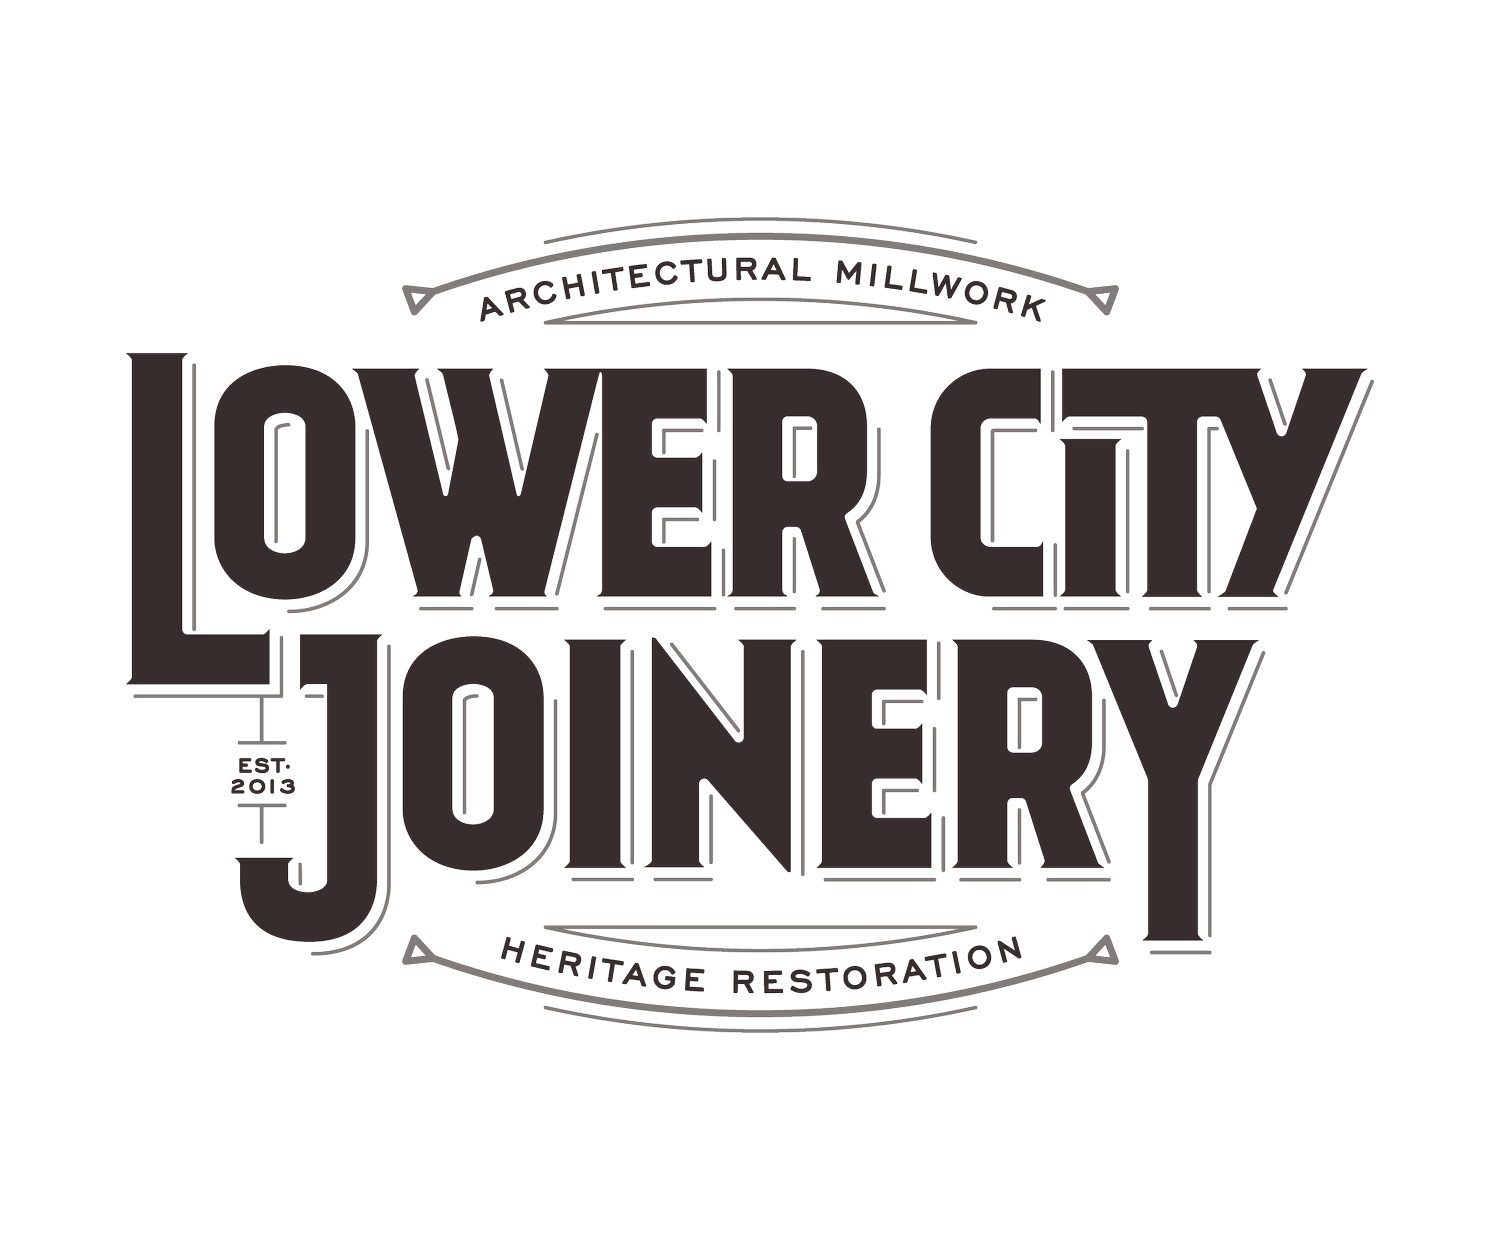 Lower City Joinery